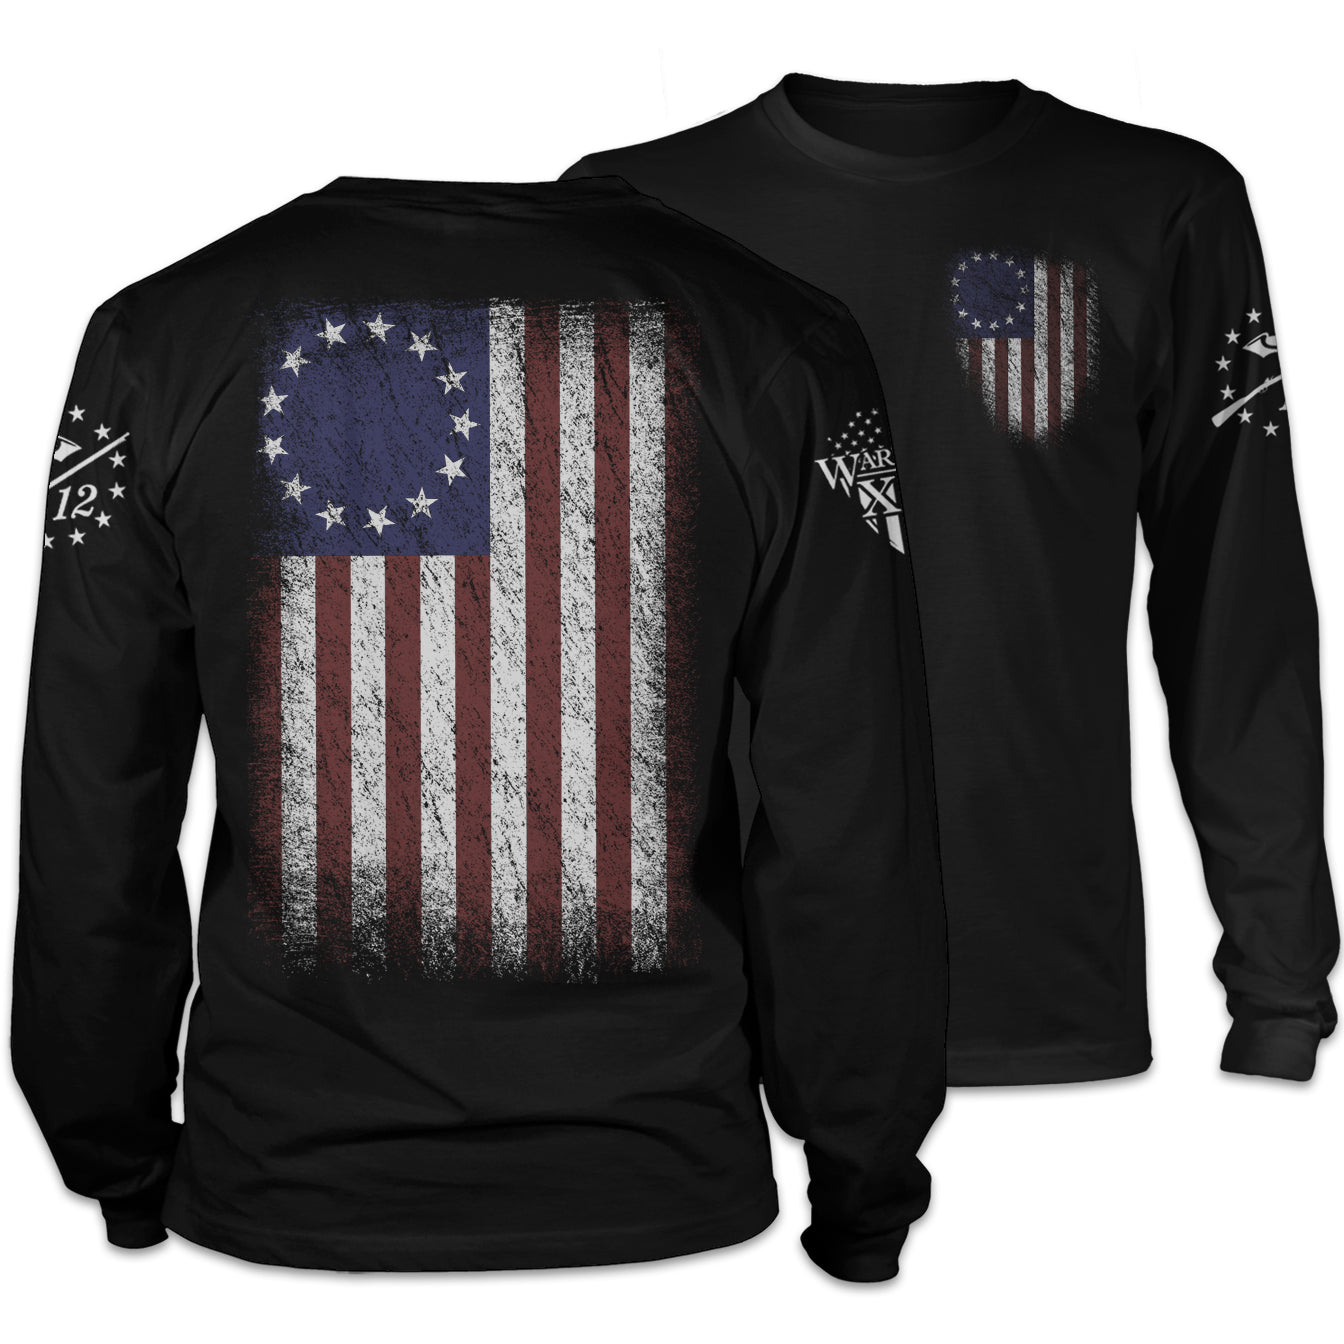 Front and back black long sleeve shirt with the Betsy Ross flag.